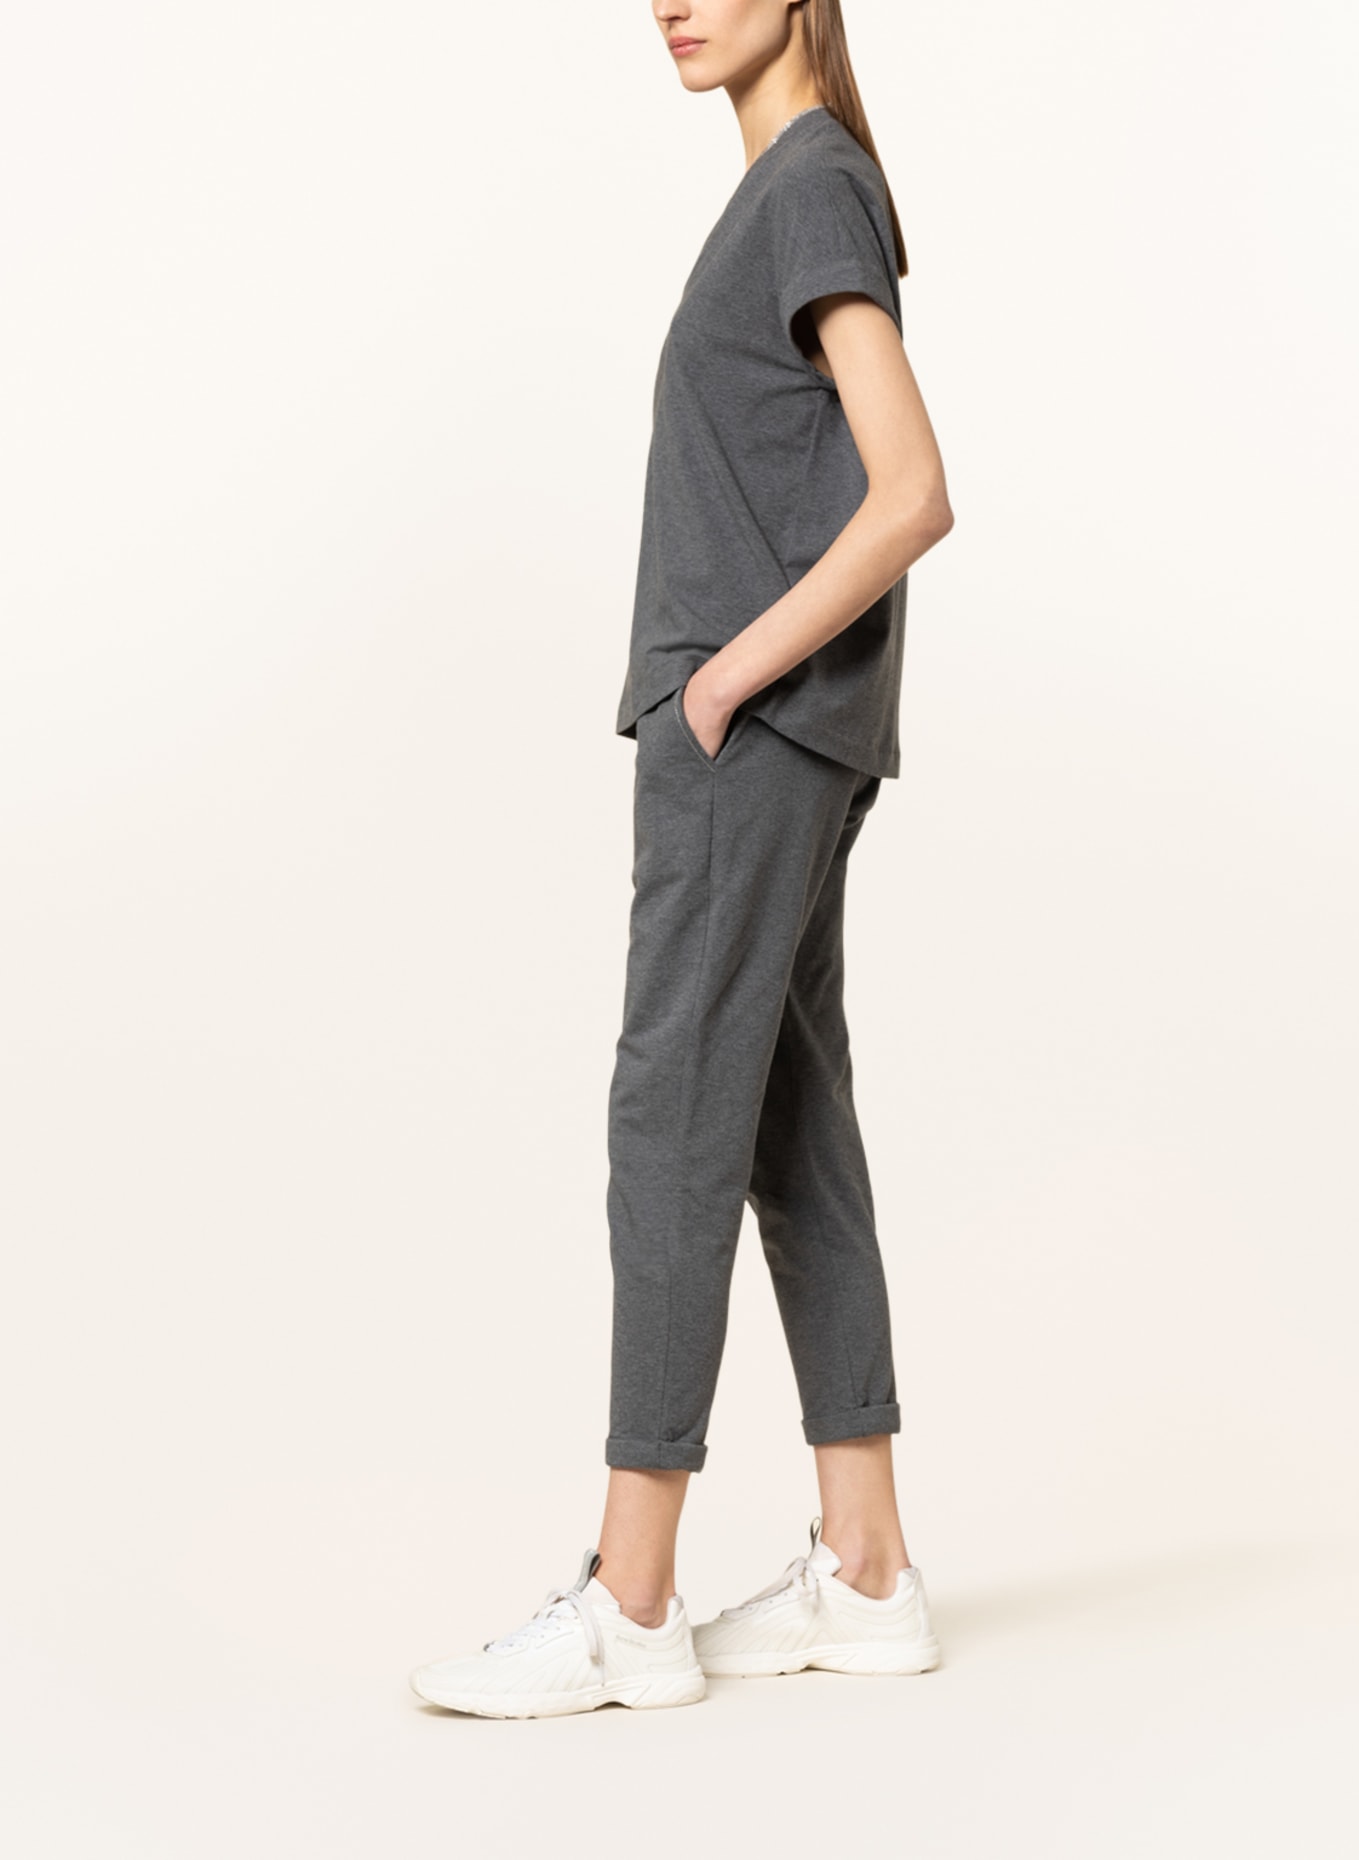 BRUNELLO CUCINELLI Trousers in jogger style with decorative gems, Color: GRAY (Image 4)